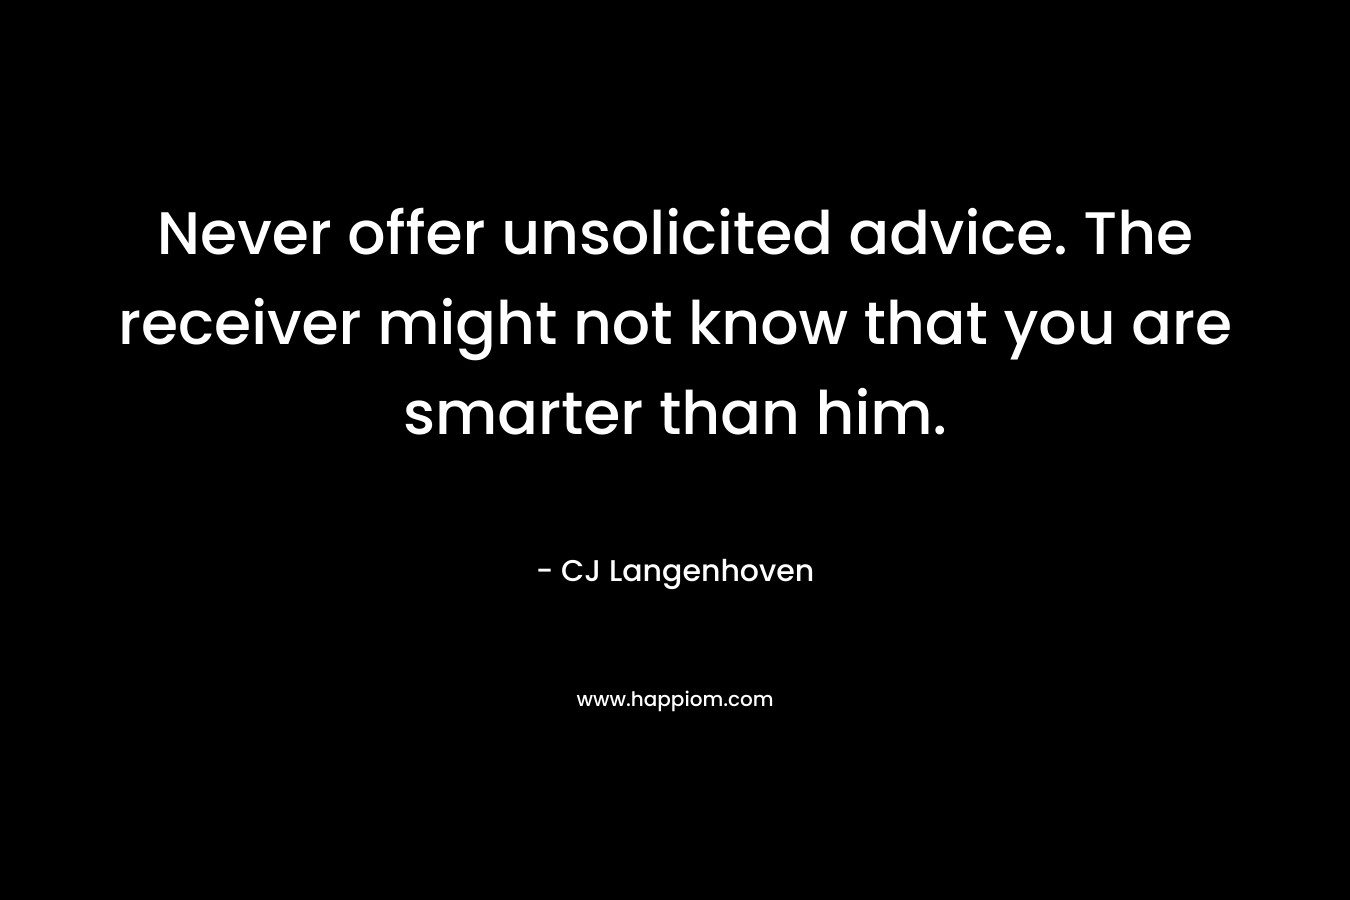 Never offer unsolicited advice. The receiver might not know that you are smarter than him. – CJ Langenhoven